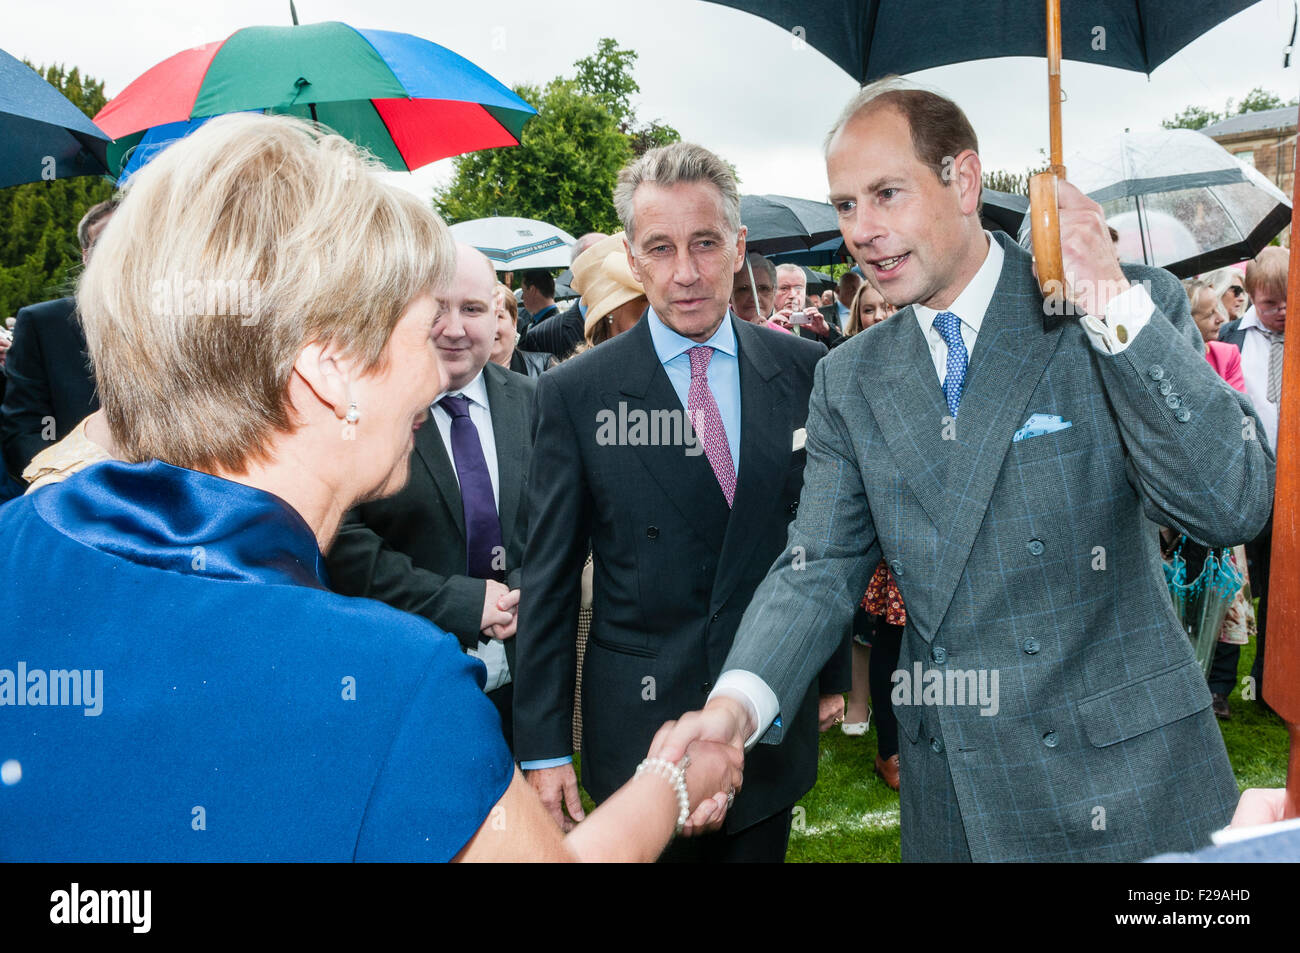 Hillsborough, Northern Ireland. 14 Sep 2015. Prince Edward, the Earl of Wessex, talks to guests at the annual Hillsborough Garden Party. Credit:  Stephen Barnes/Alamy Live News Stock Photo